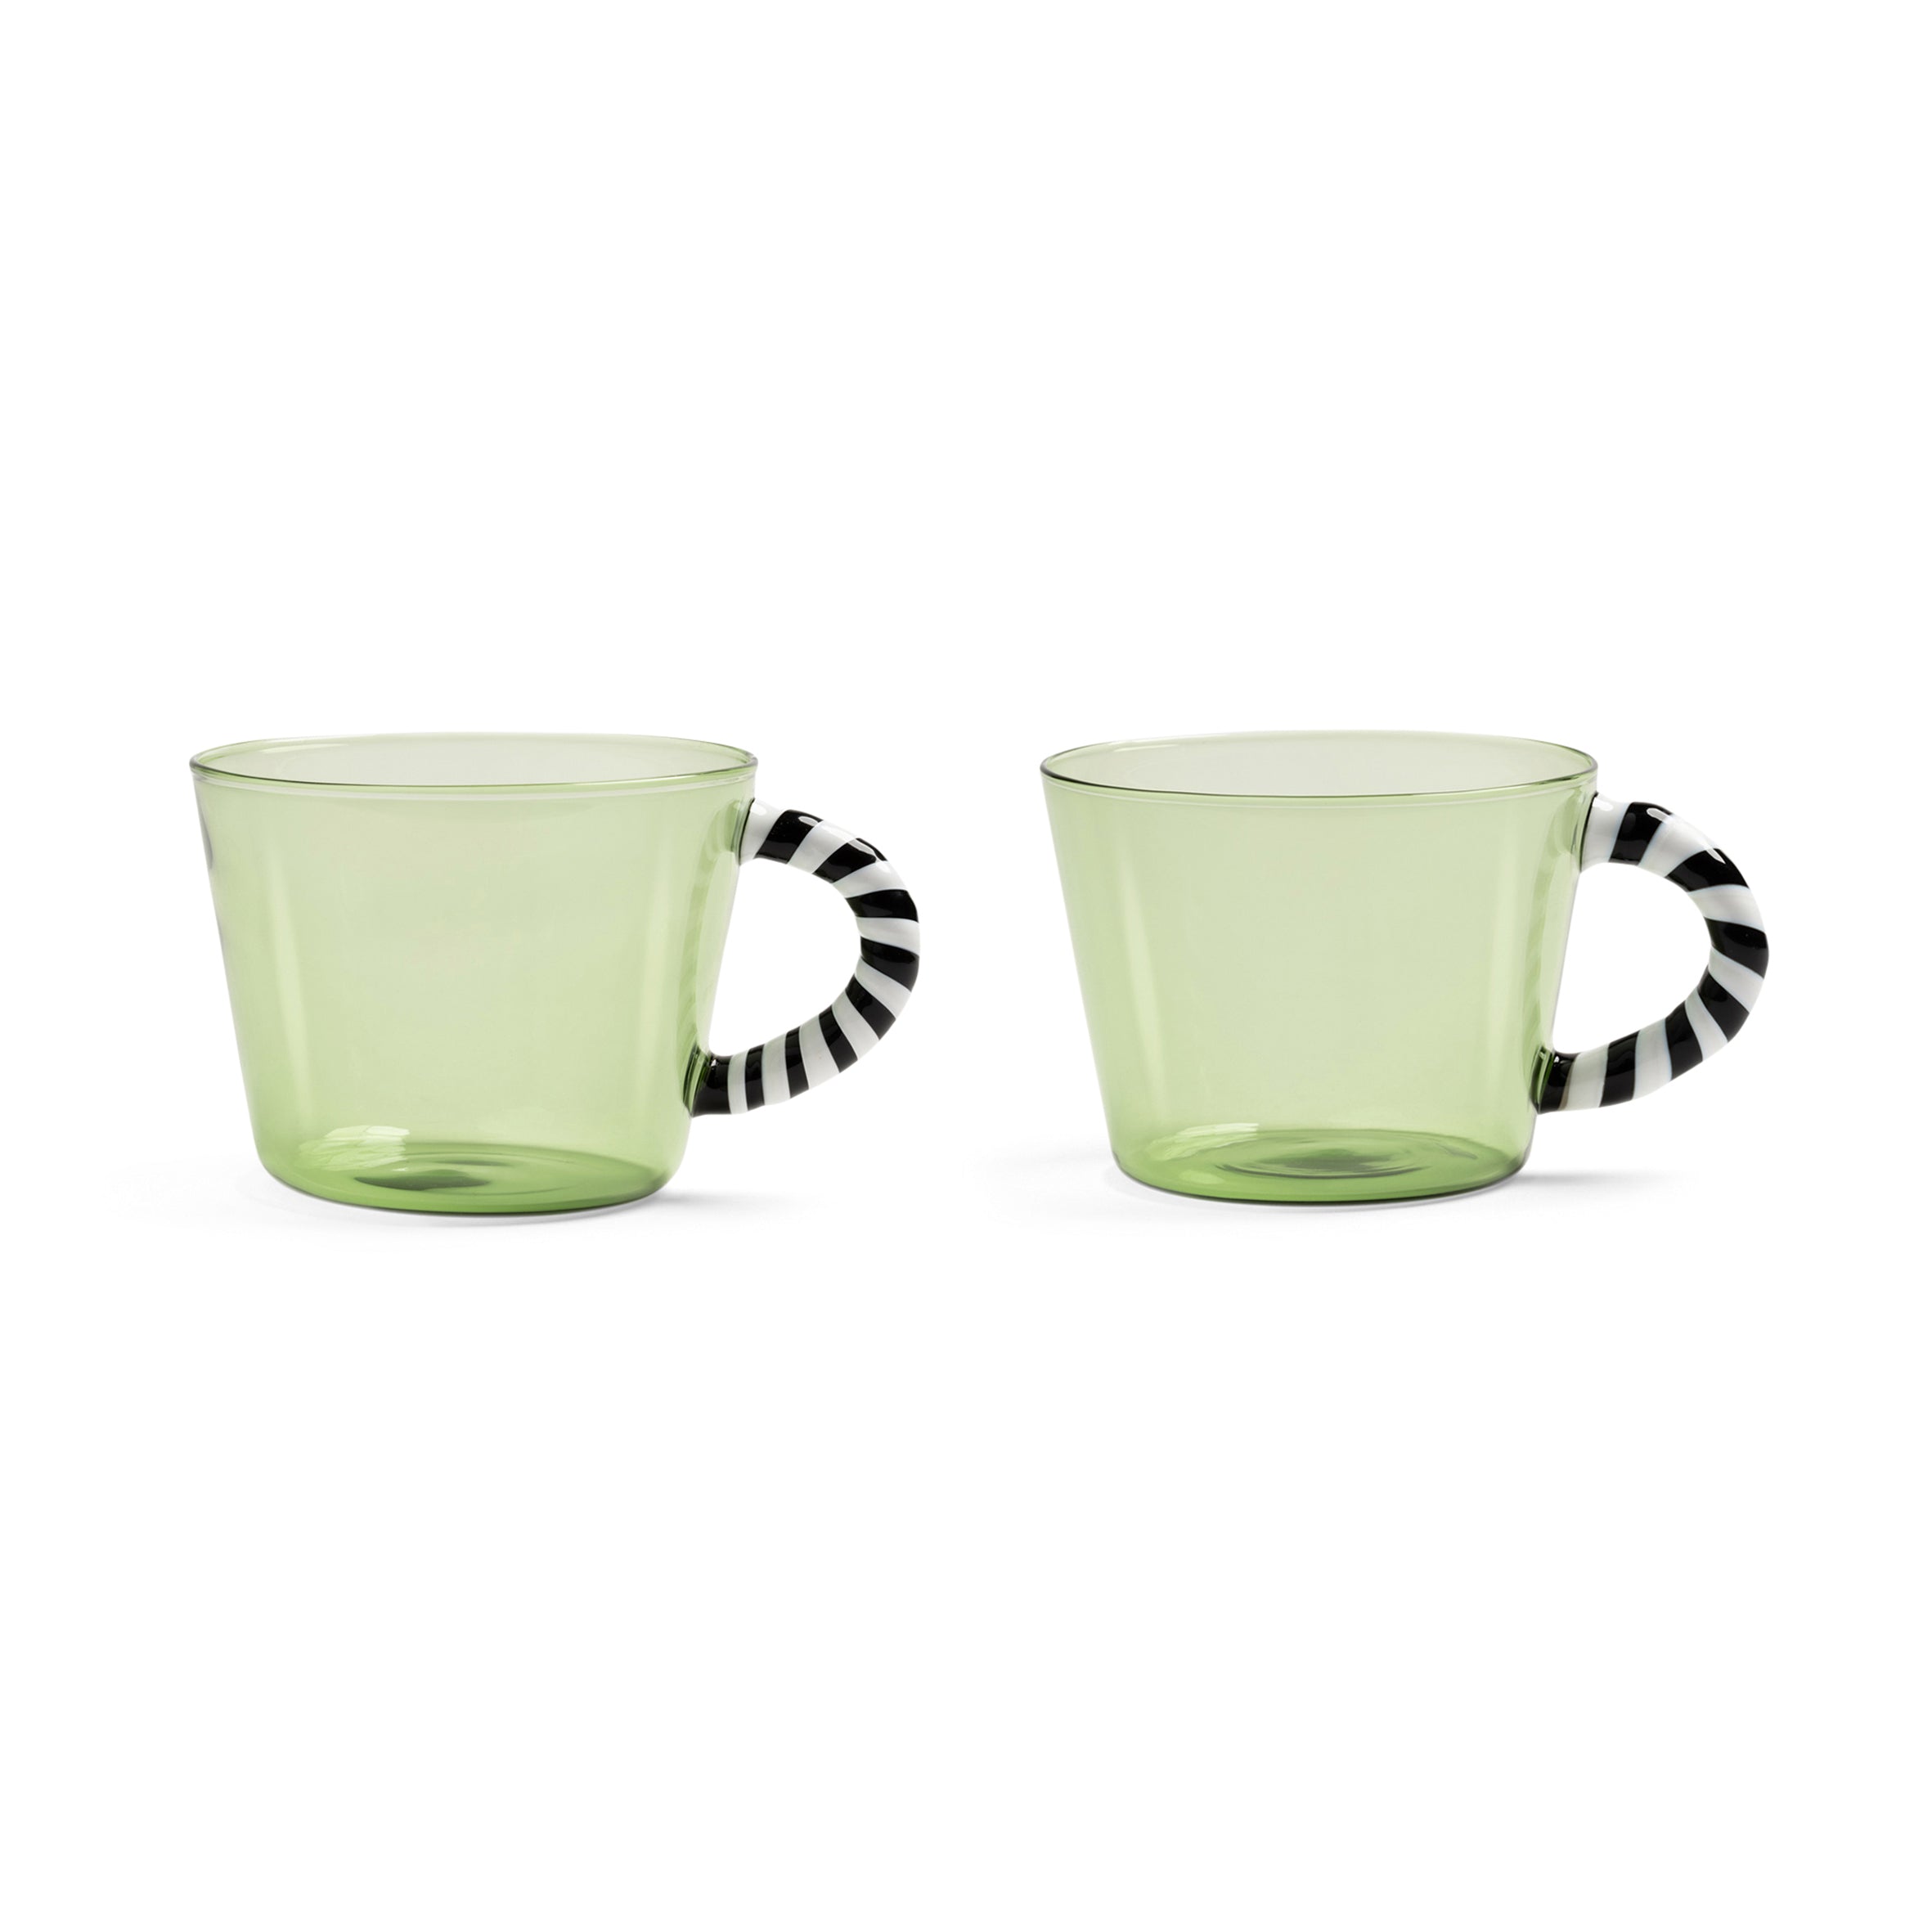 tea or coffee fancy duet green glass set, shop the best Ramadan gift gifts for her for him from Inna carton online store dubai, UAE!